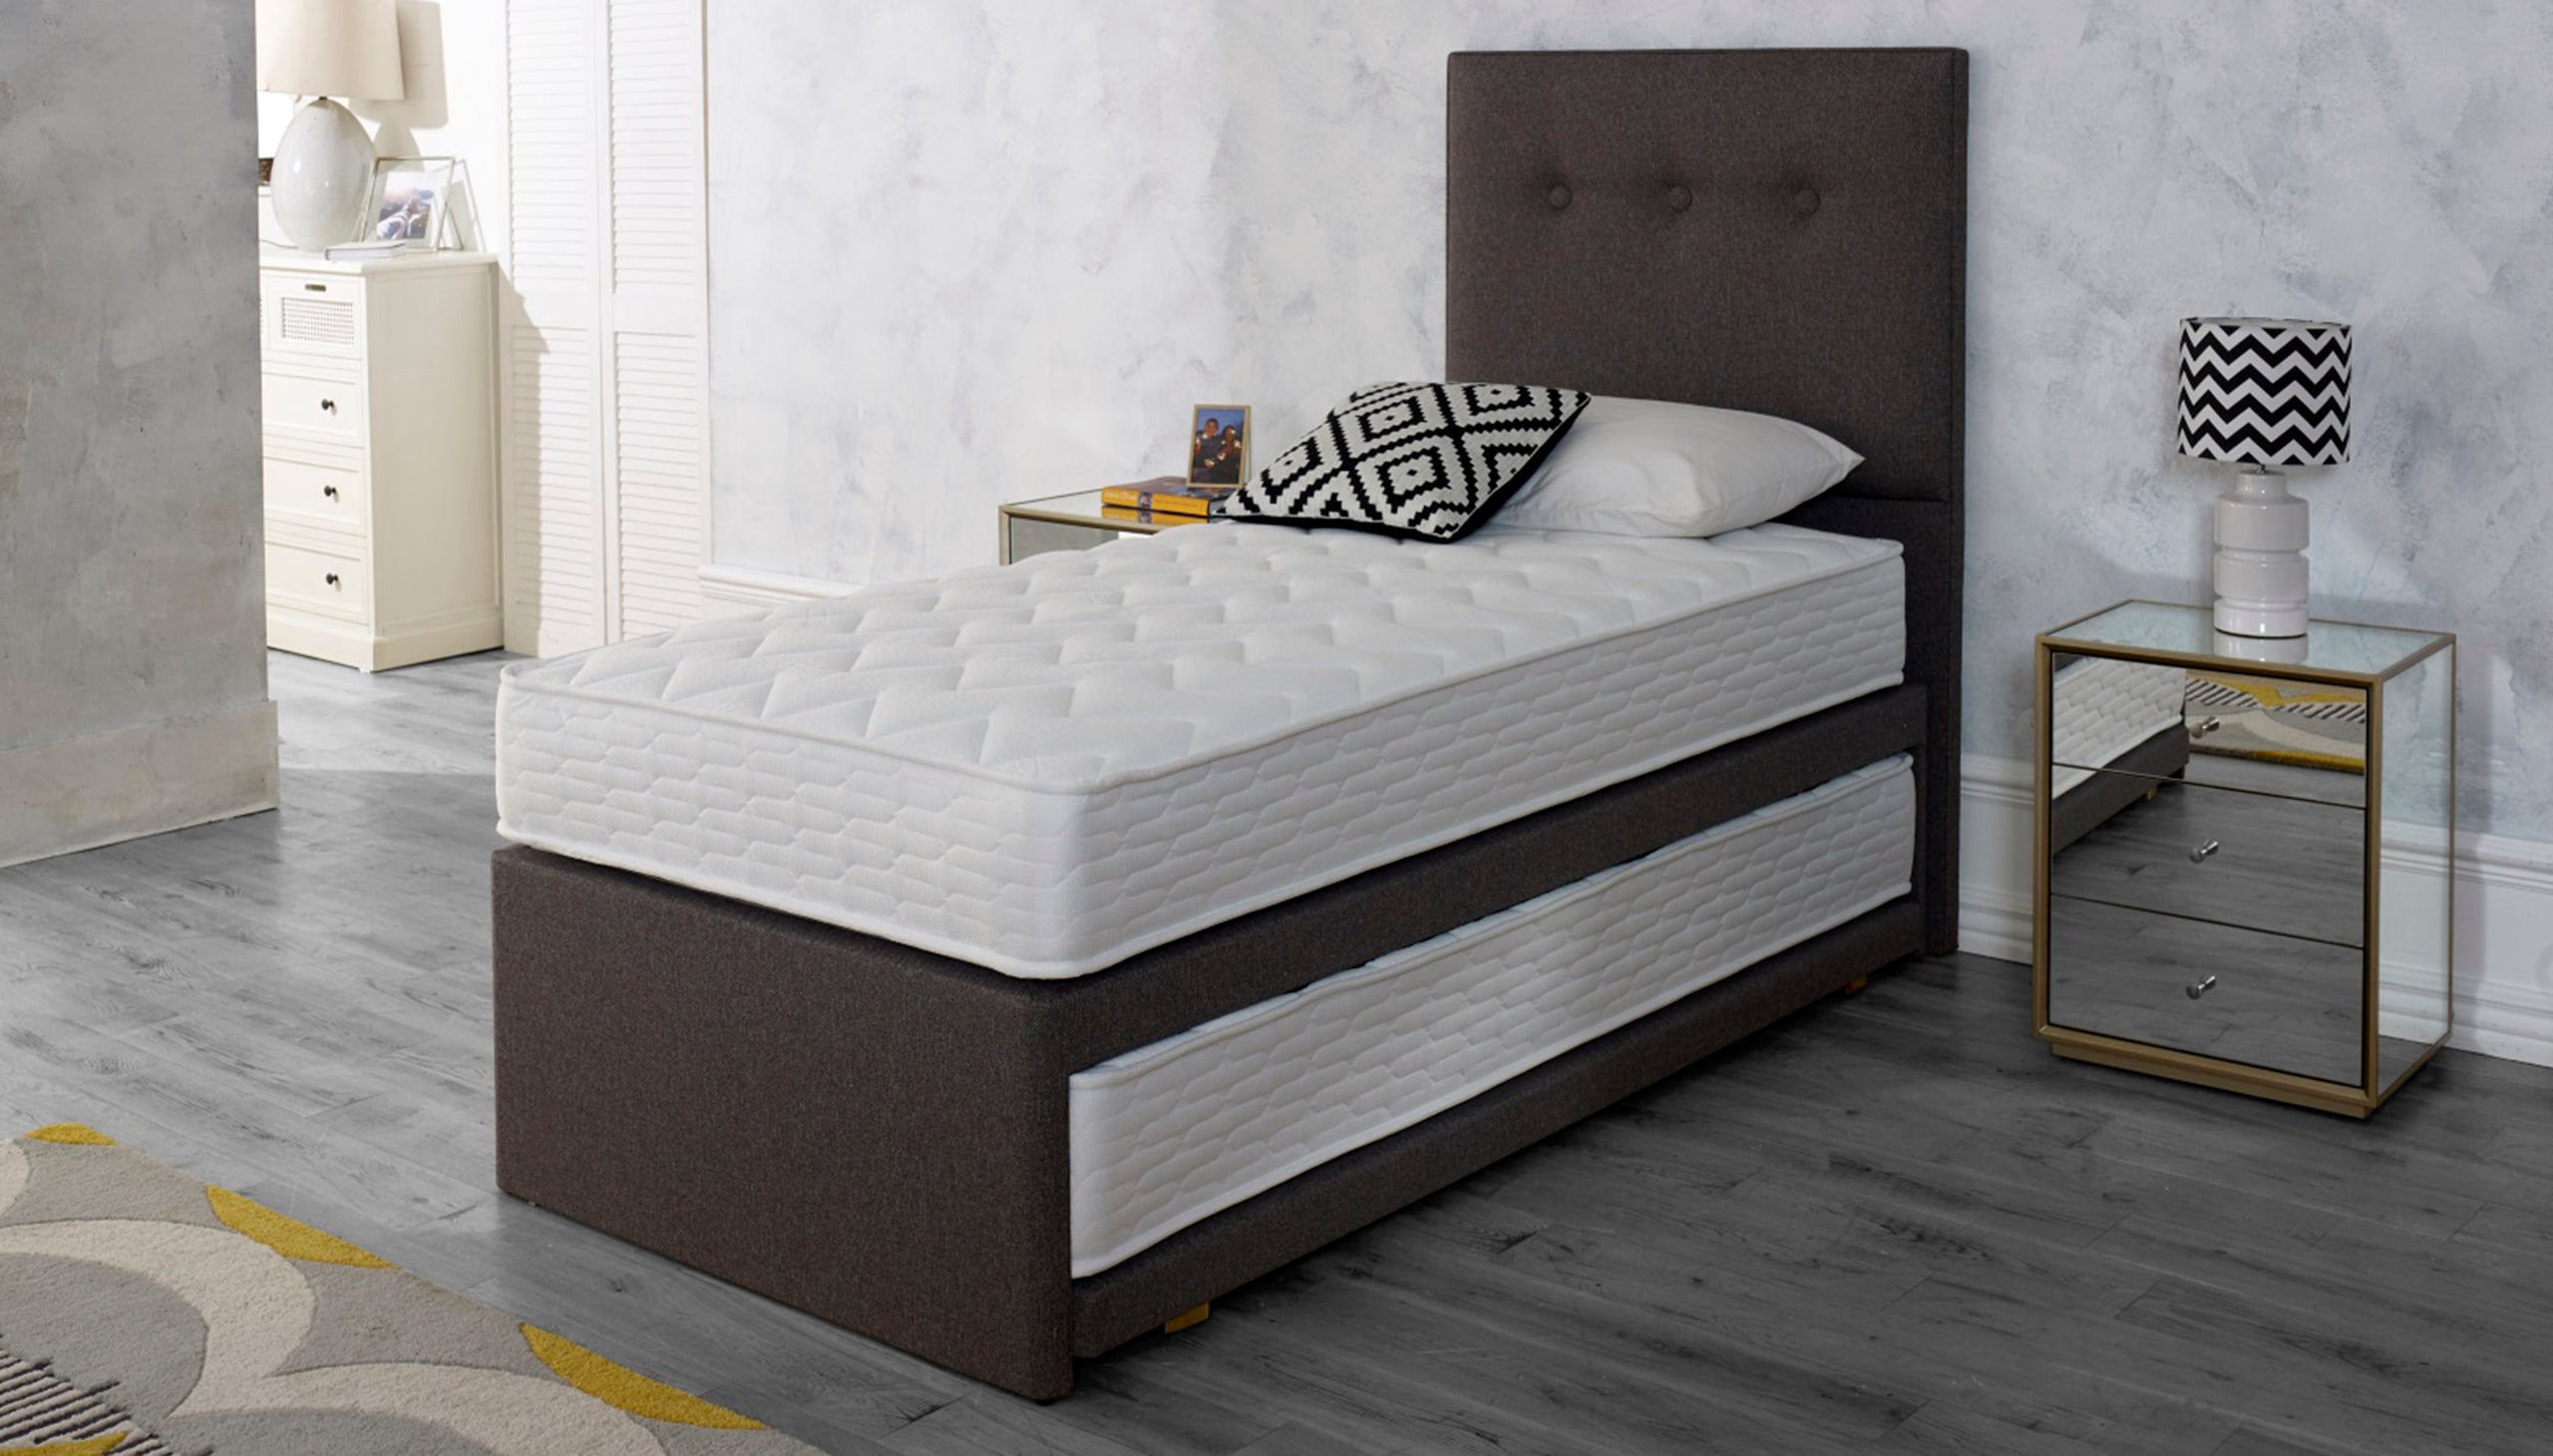 Tandem Guest Bed with Pocket Sprung + Open Coil Mattress